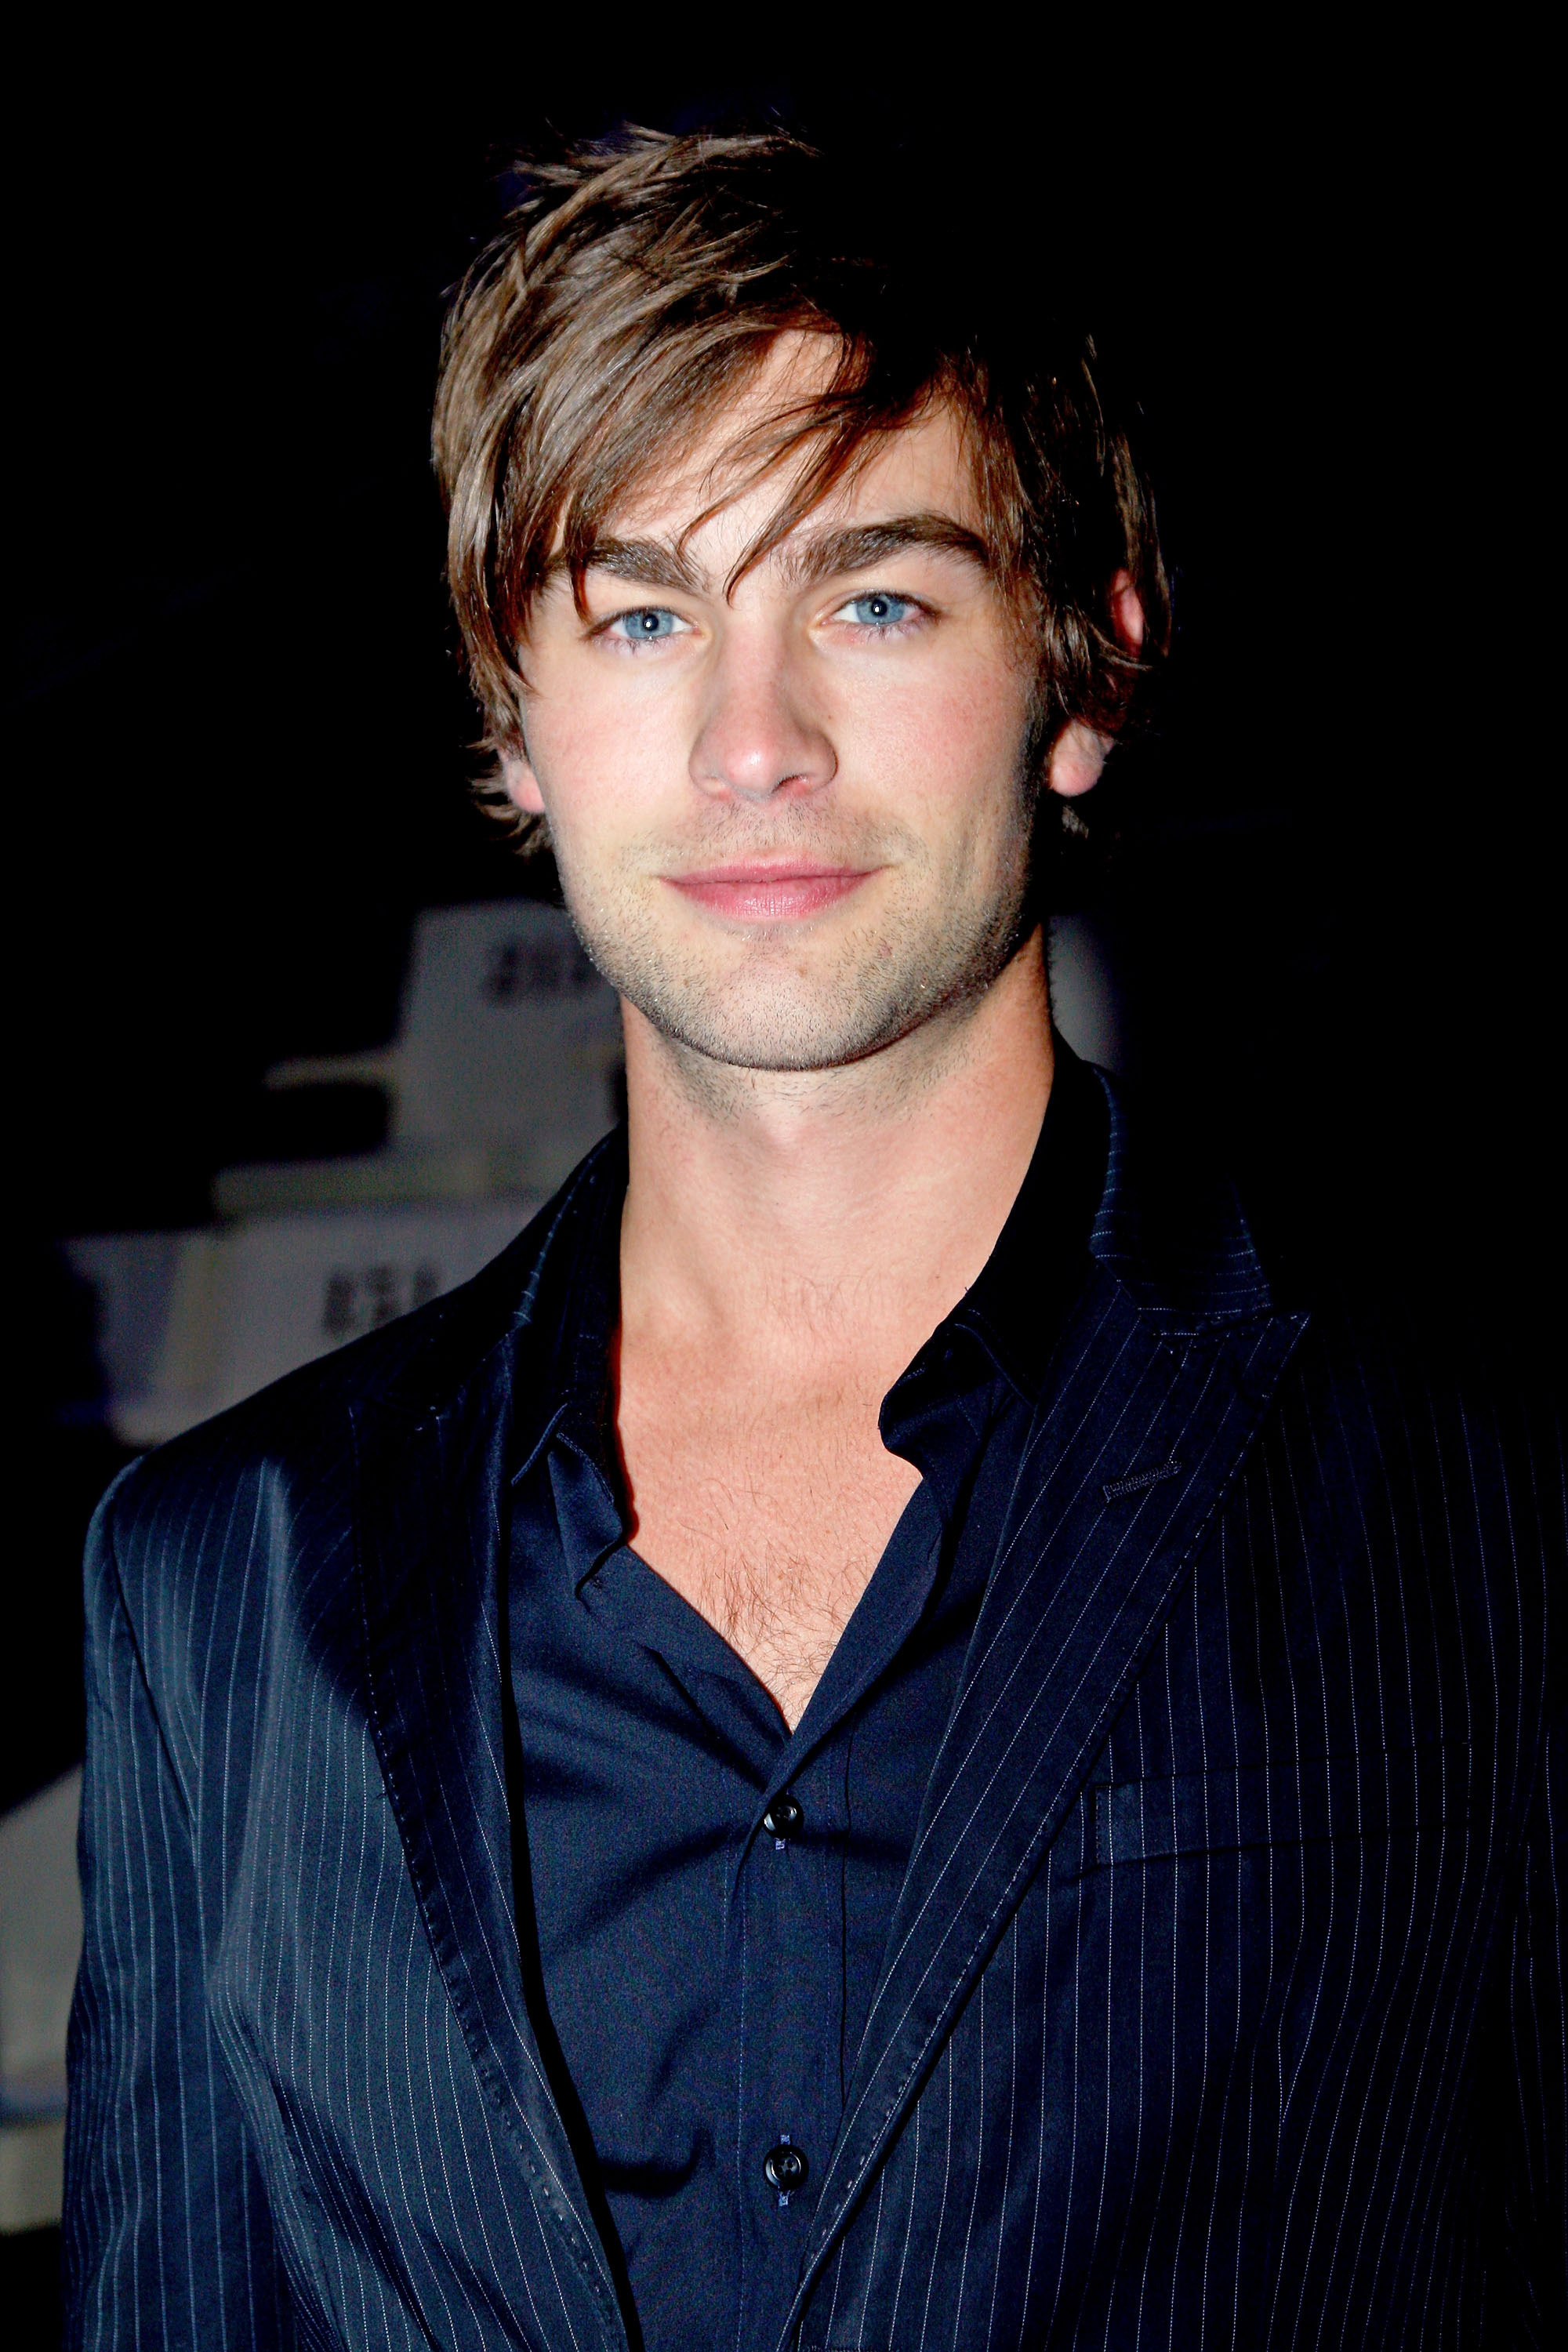 Chace Crawford: Kevin Moskowitz - The Deep (The Boys), Billy LeFever (Blood & Oil). 2000x3000 HD Wallpaper.